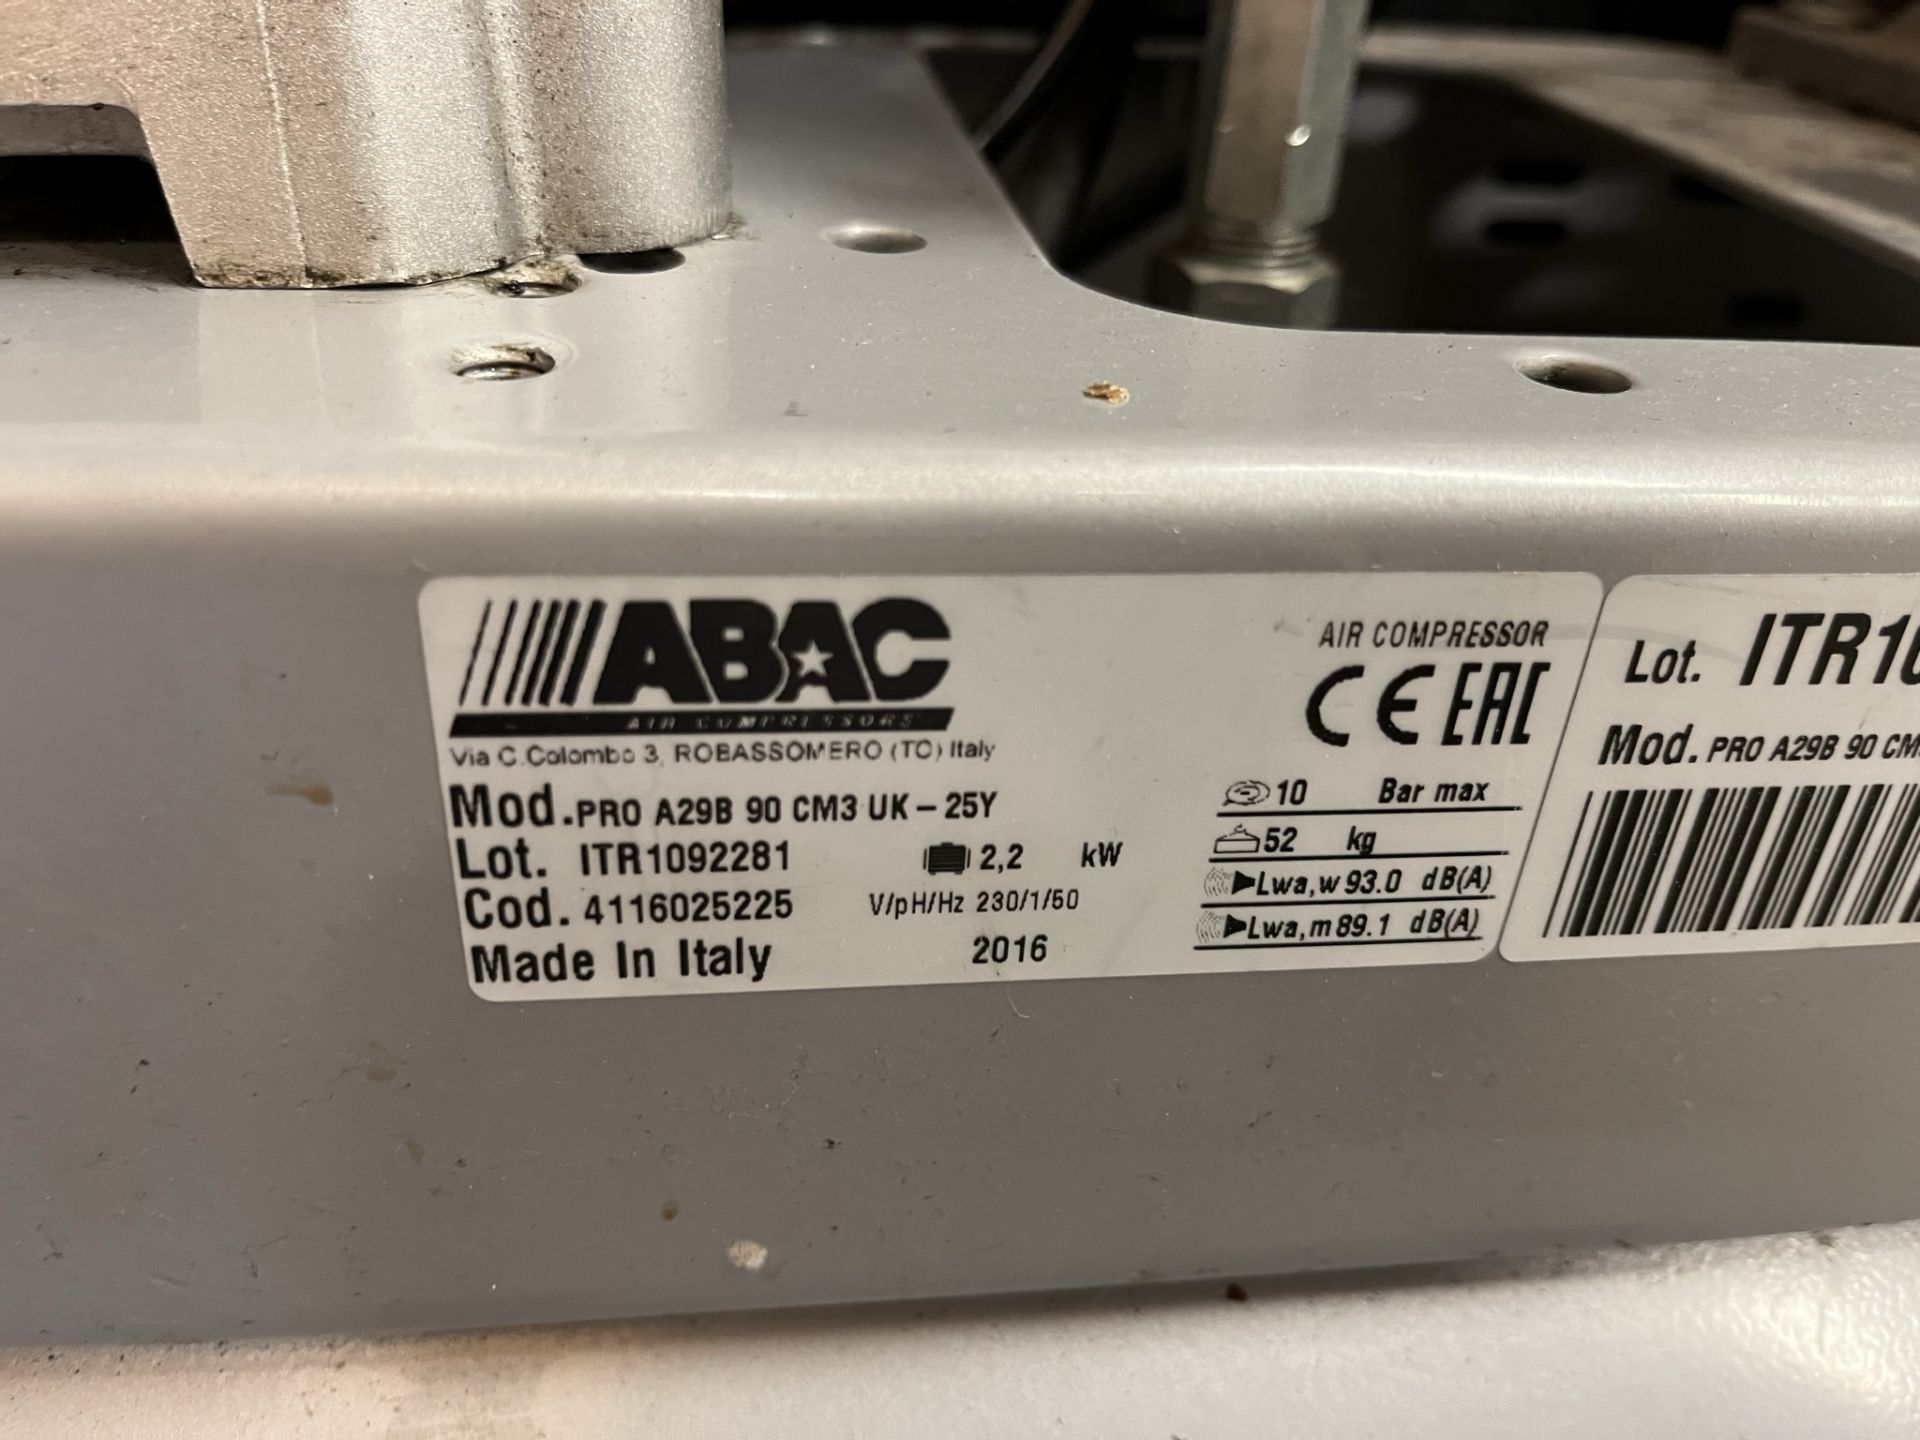 ABAC Pro A29B90CM3UK Receiver mounted mobile compressor 2016 - Image 2 of 3